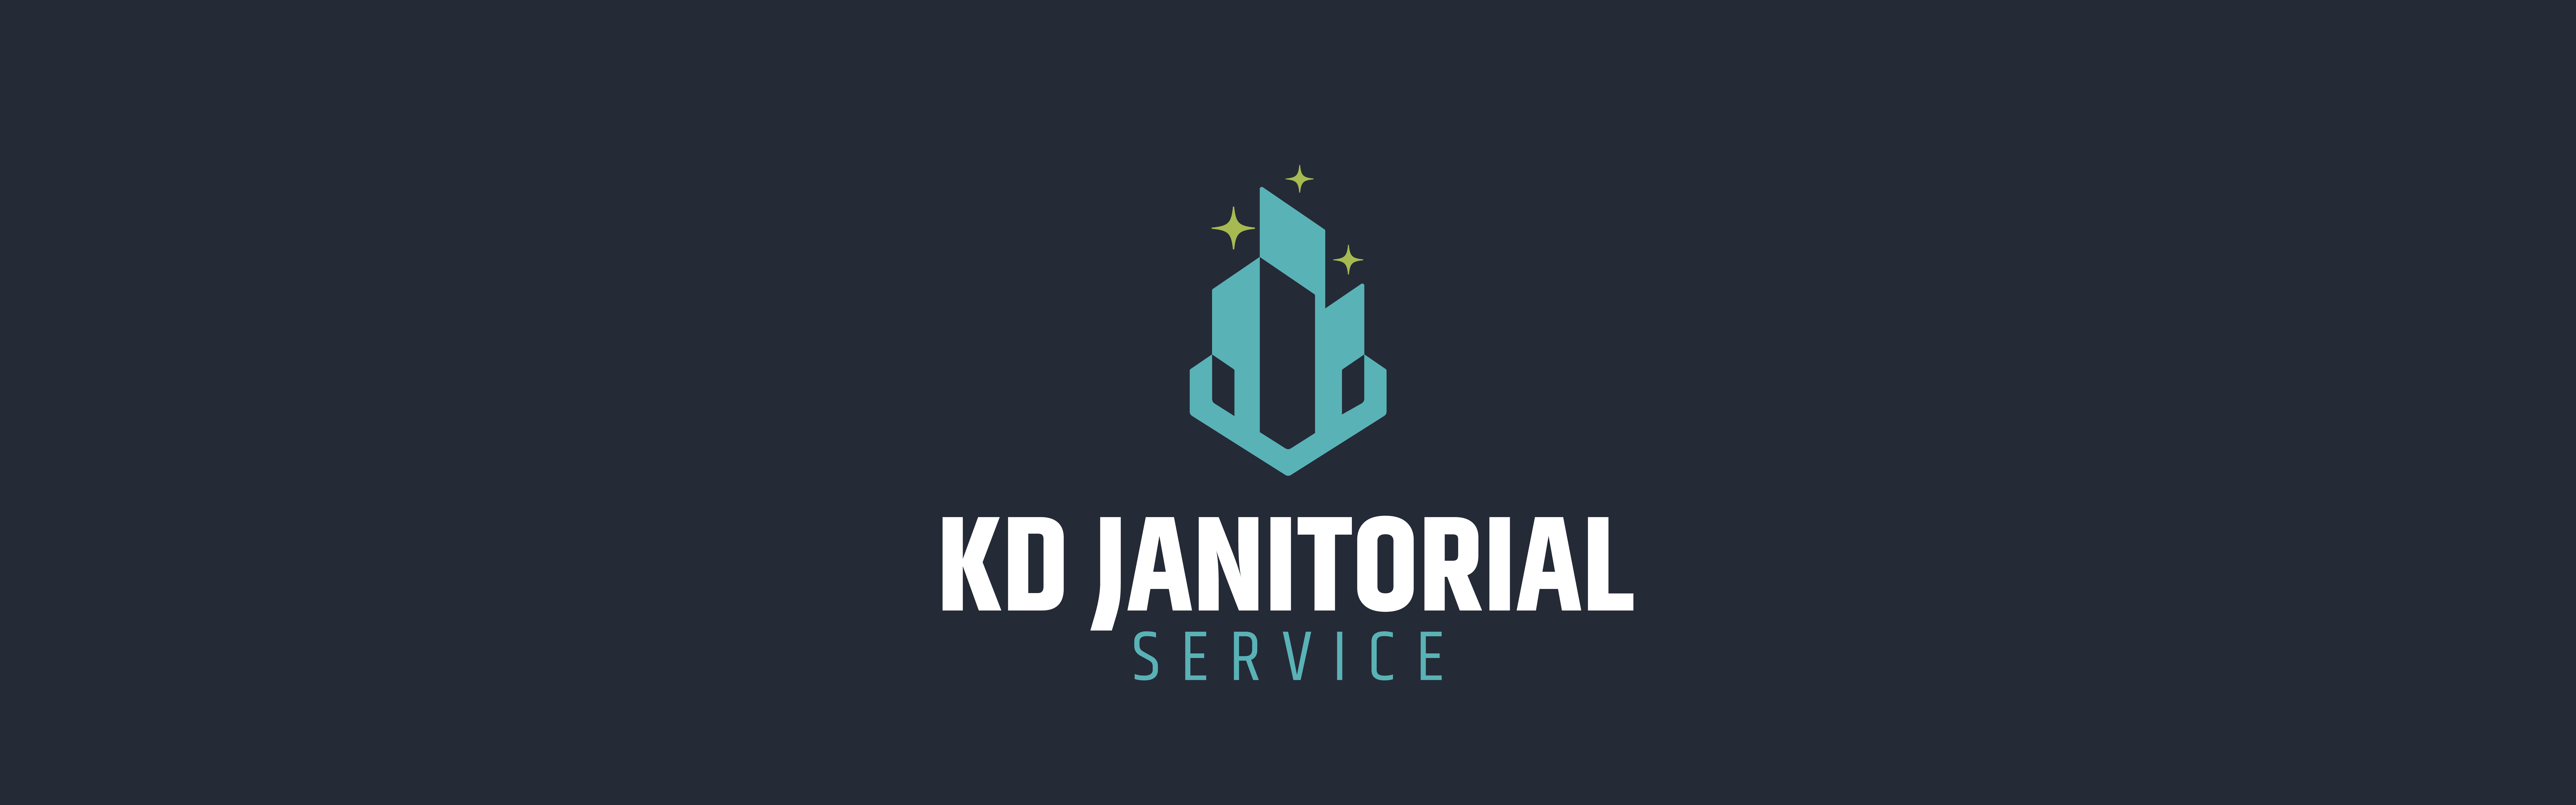 Logo of KD Janitorial Service featuring a stylized broom and dustpan on a dark background with sparkling stars to denote cleanliness.